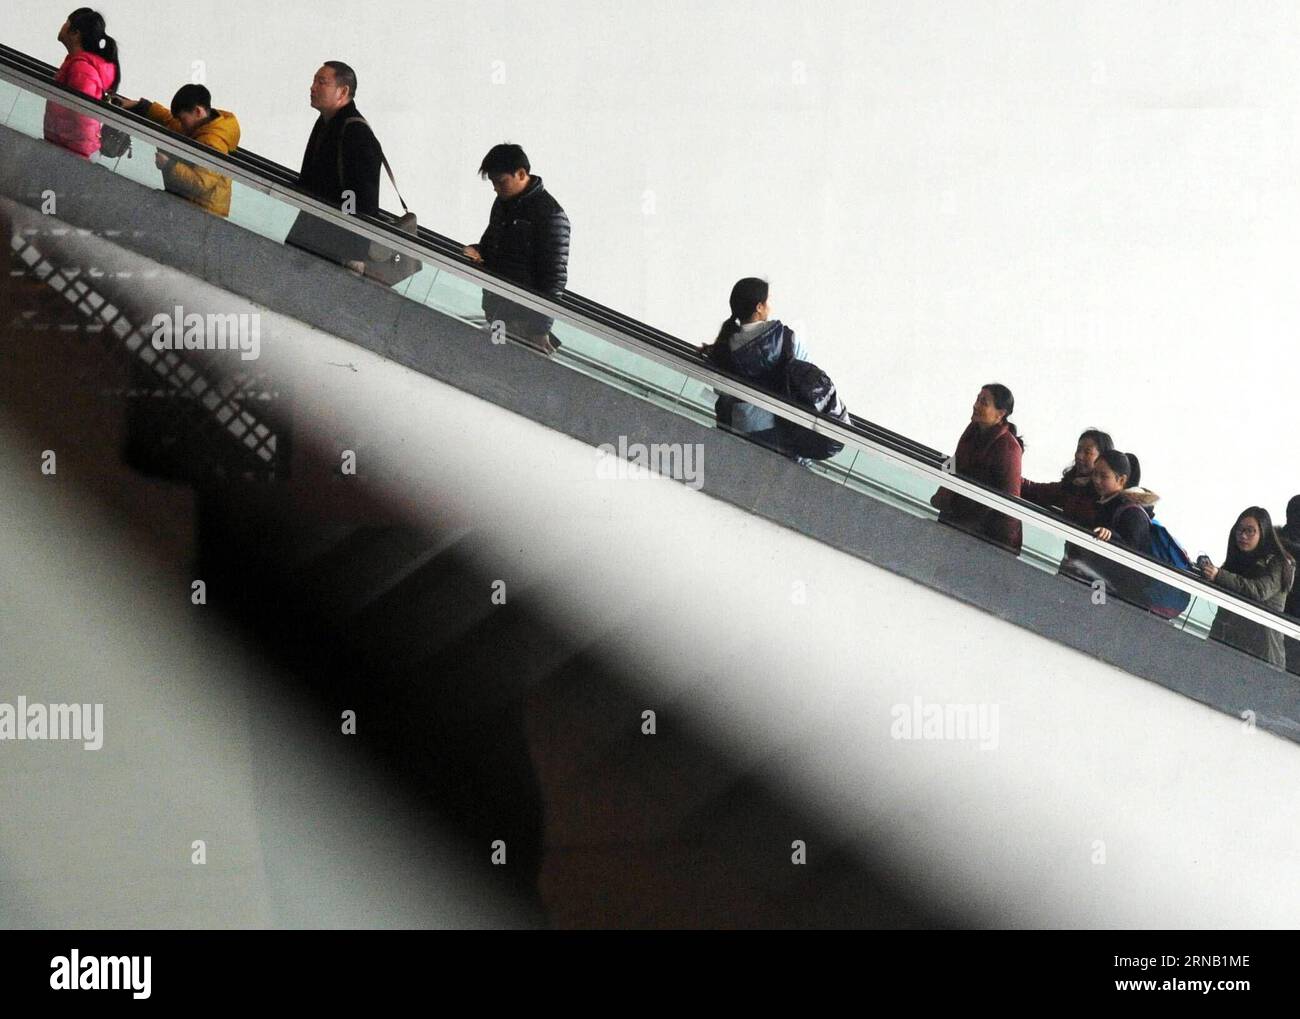 SUZHOU  Passengers take an escalator to a waiting room at the railway station of Suzhou, east China s Jiangsu Province, Feb. 13, 2016. Chinese passengers made a record number of trips during the Spring Festival holiday, according to the Ministry of Transport (MOT) on Sunday. Passenger trips reached 400 million from Feb. 7 to 13, up 6.7 percent from last year, MOT data showed. Over 47 million trips were made by rail, more than 333 million on road and about 8.5 million by air. Road trips were up by 7 percent. ) (lfj) CHINA-SPRING FESTIVAL HOLIDAY-TRIPS (CN) HangxXingwei PUBLICATIONxNOTxINxCHN Stock Photo